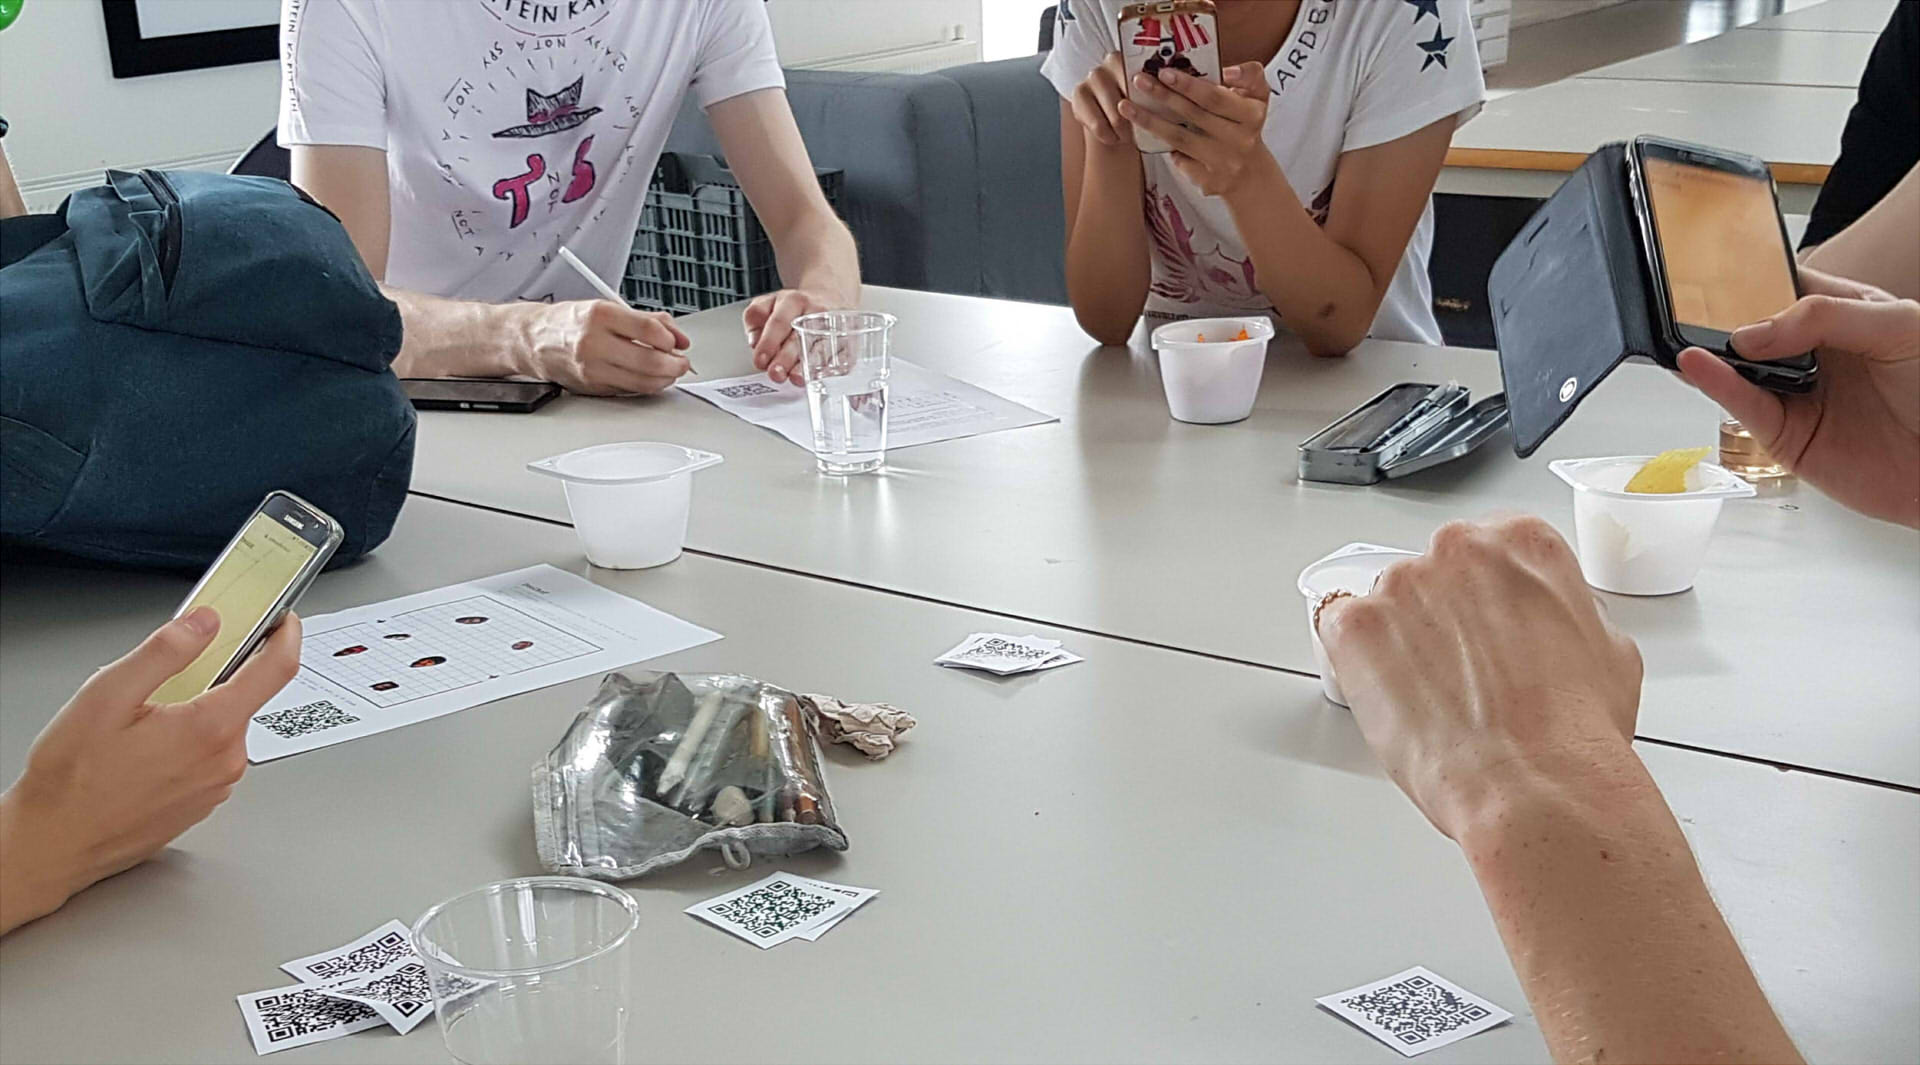 HKU Introduction Game (2019) by Josien Vos